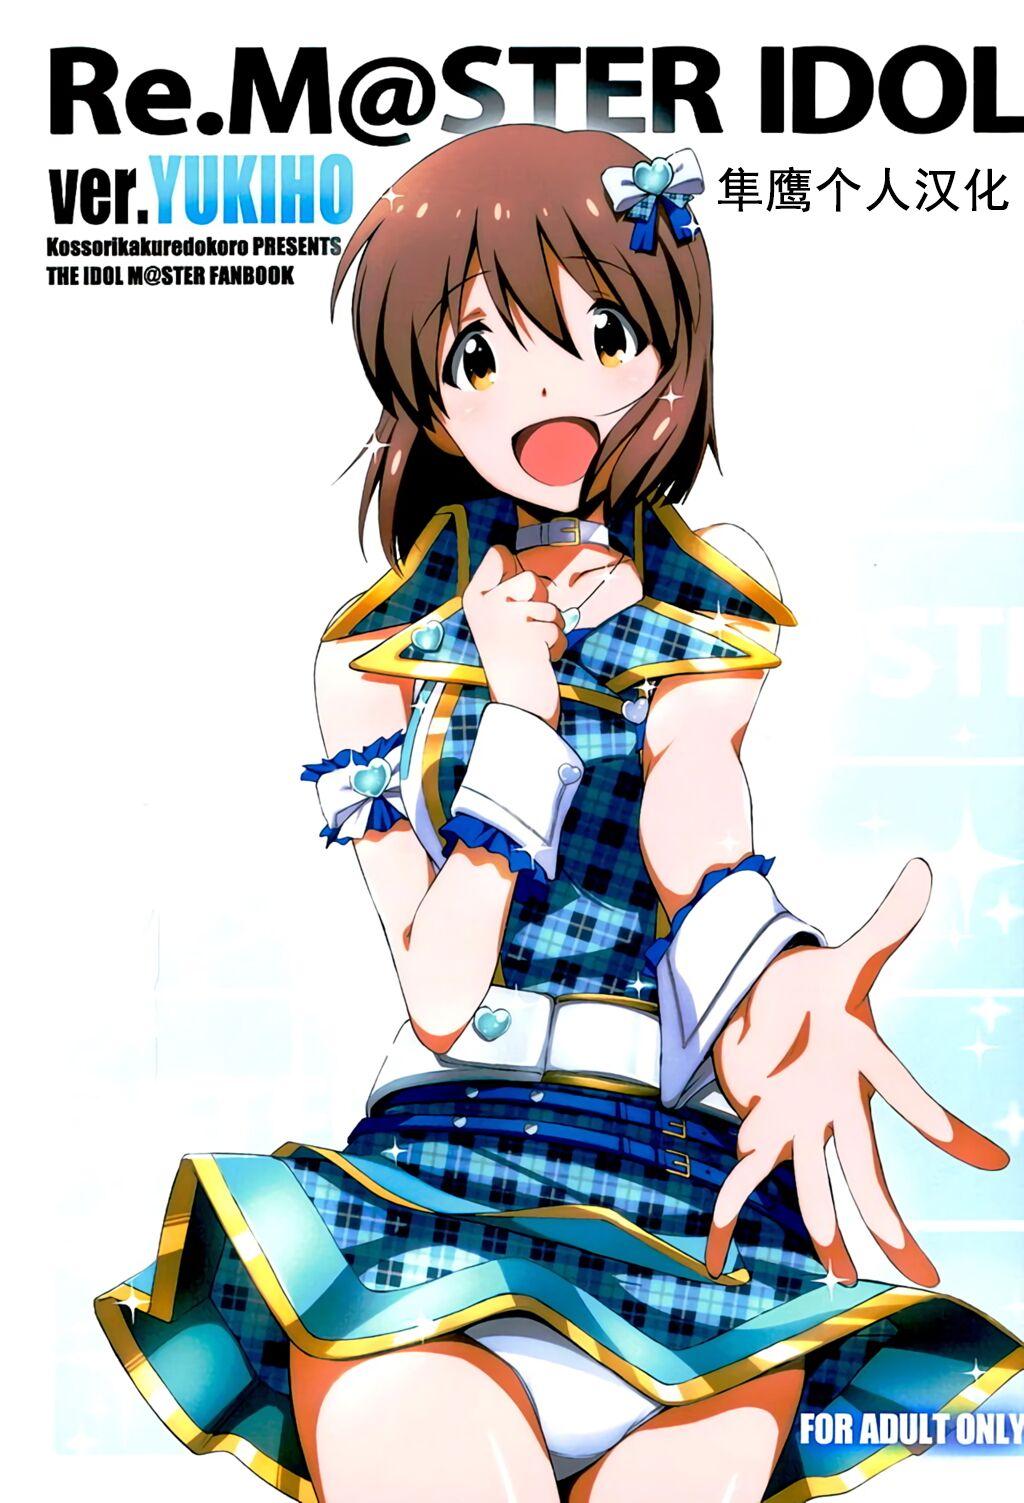 Price Re:M@STER IDOL ver.YUKIHO - The idolmaster From - Page 1